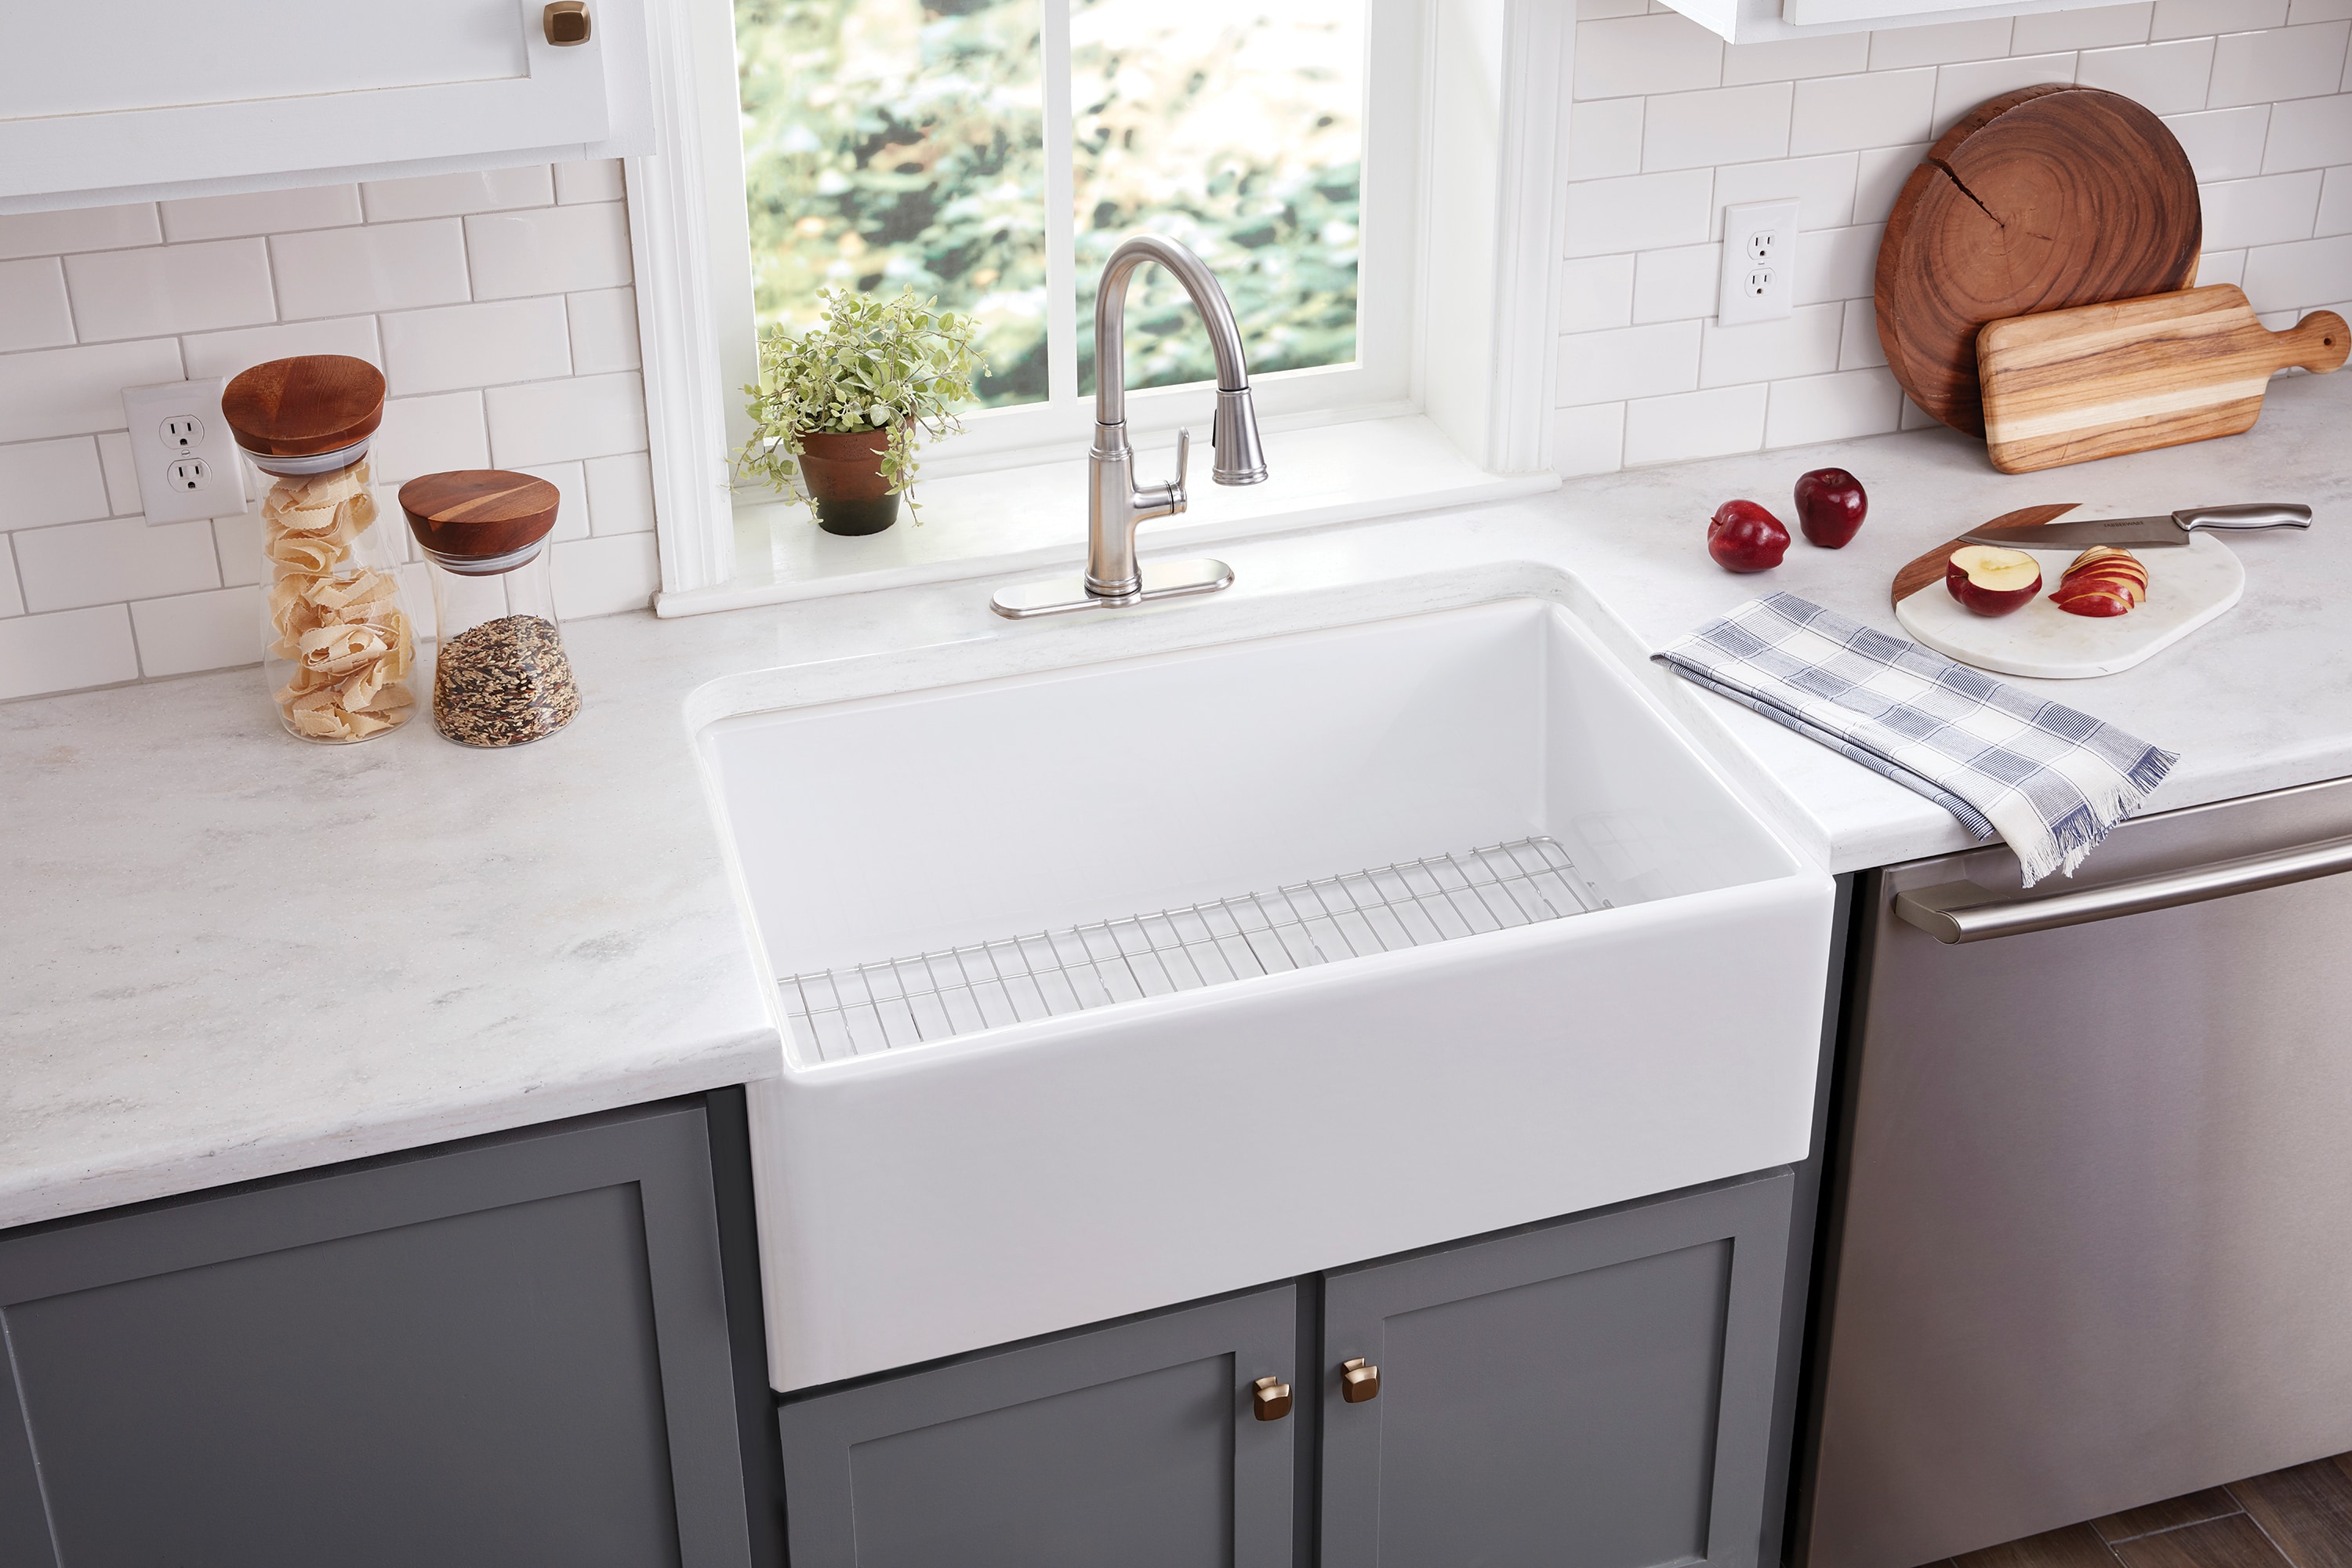 allen + roth Apron Front 33-in x 18-in White Fireclay Bowl Kitchen Sink at Lowes.com